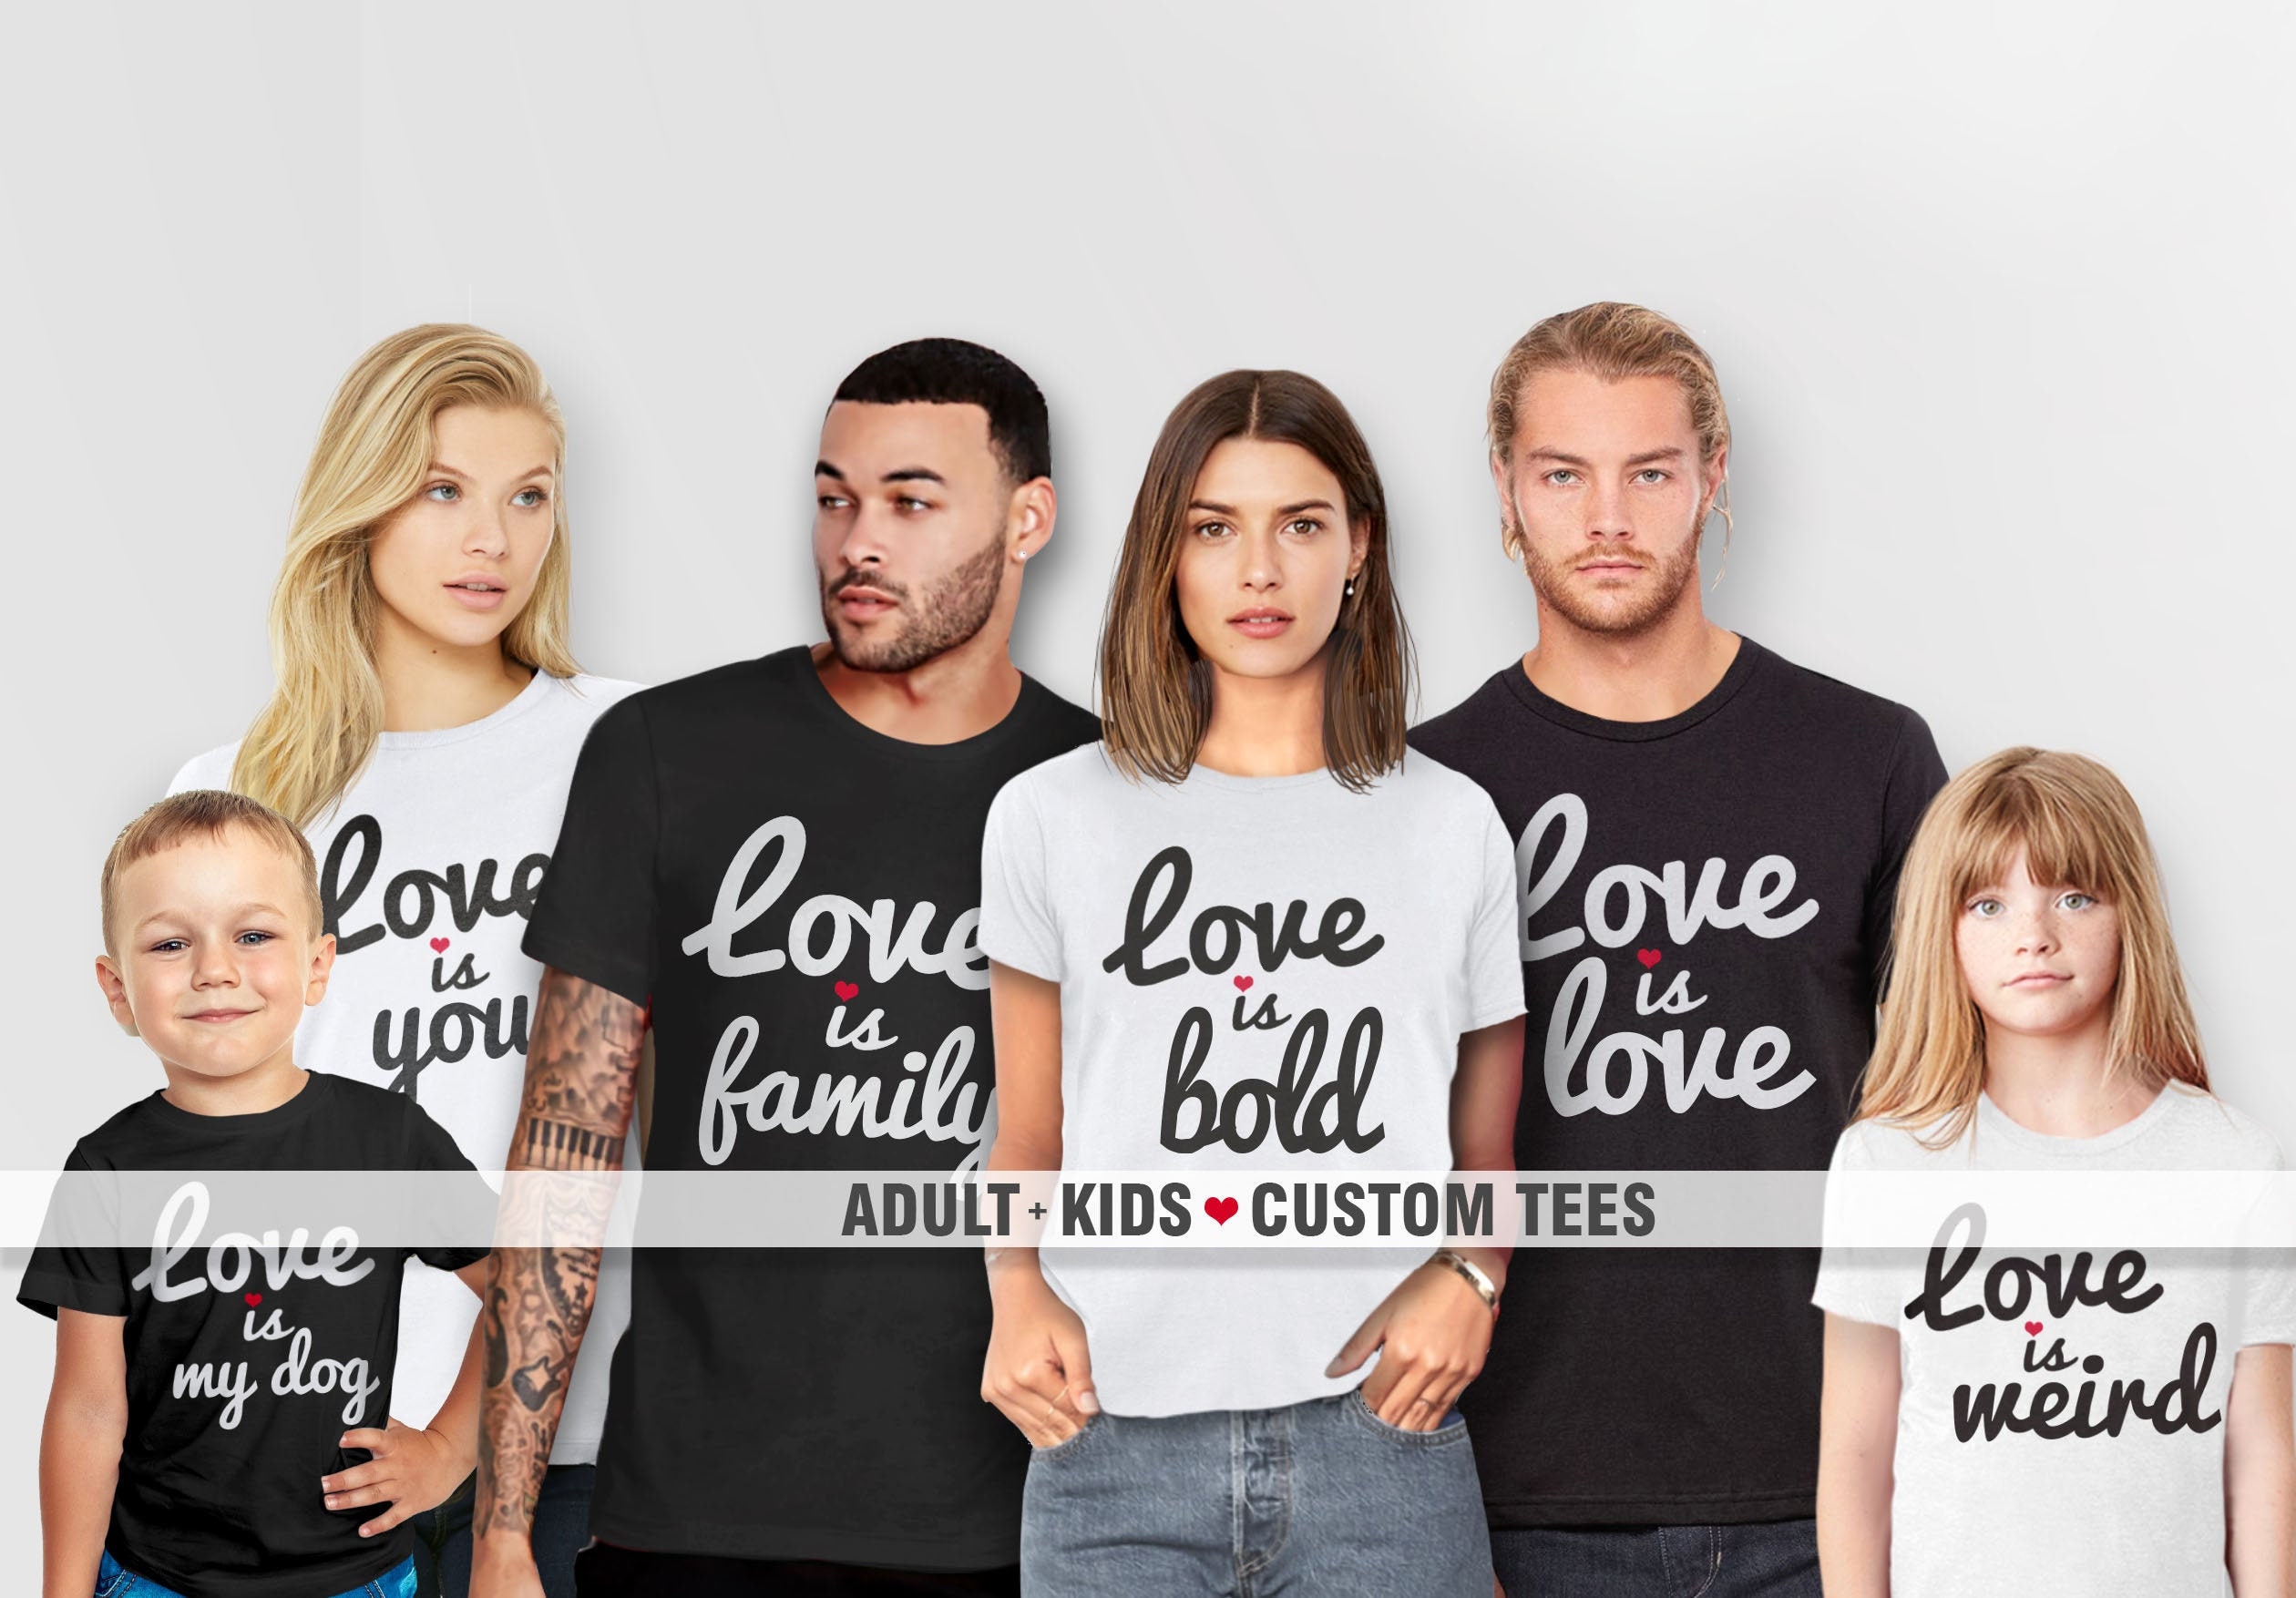 Unisex Valentines Day Oversized Cute Love Printed Wedding Matching Couple Shirts for Women Tops Blouses T-Shirts Tee